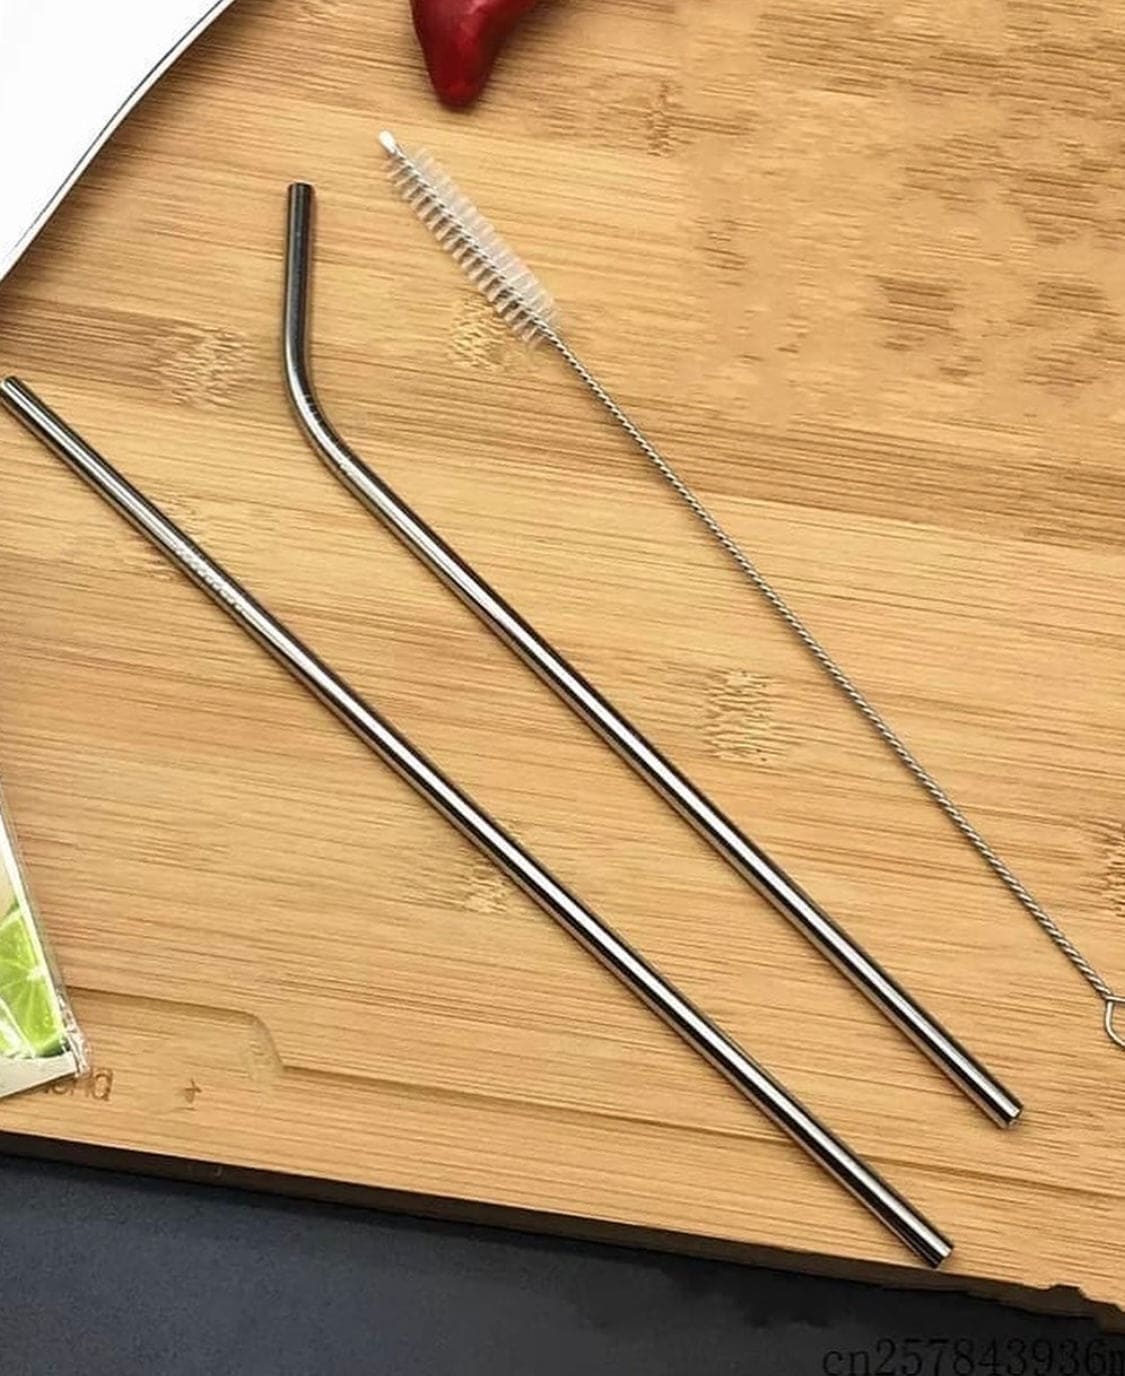 Set Of 3 Reusable Metal Straws Set with Cleaner Brush, Reusable And Environment Friendly Straw Set